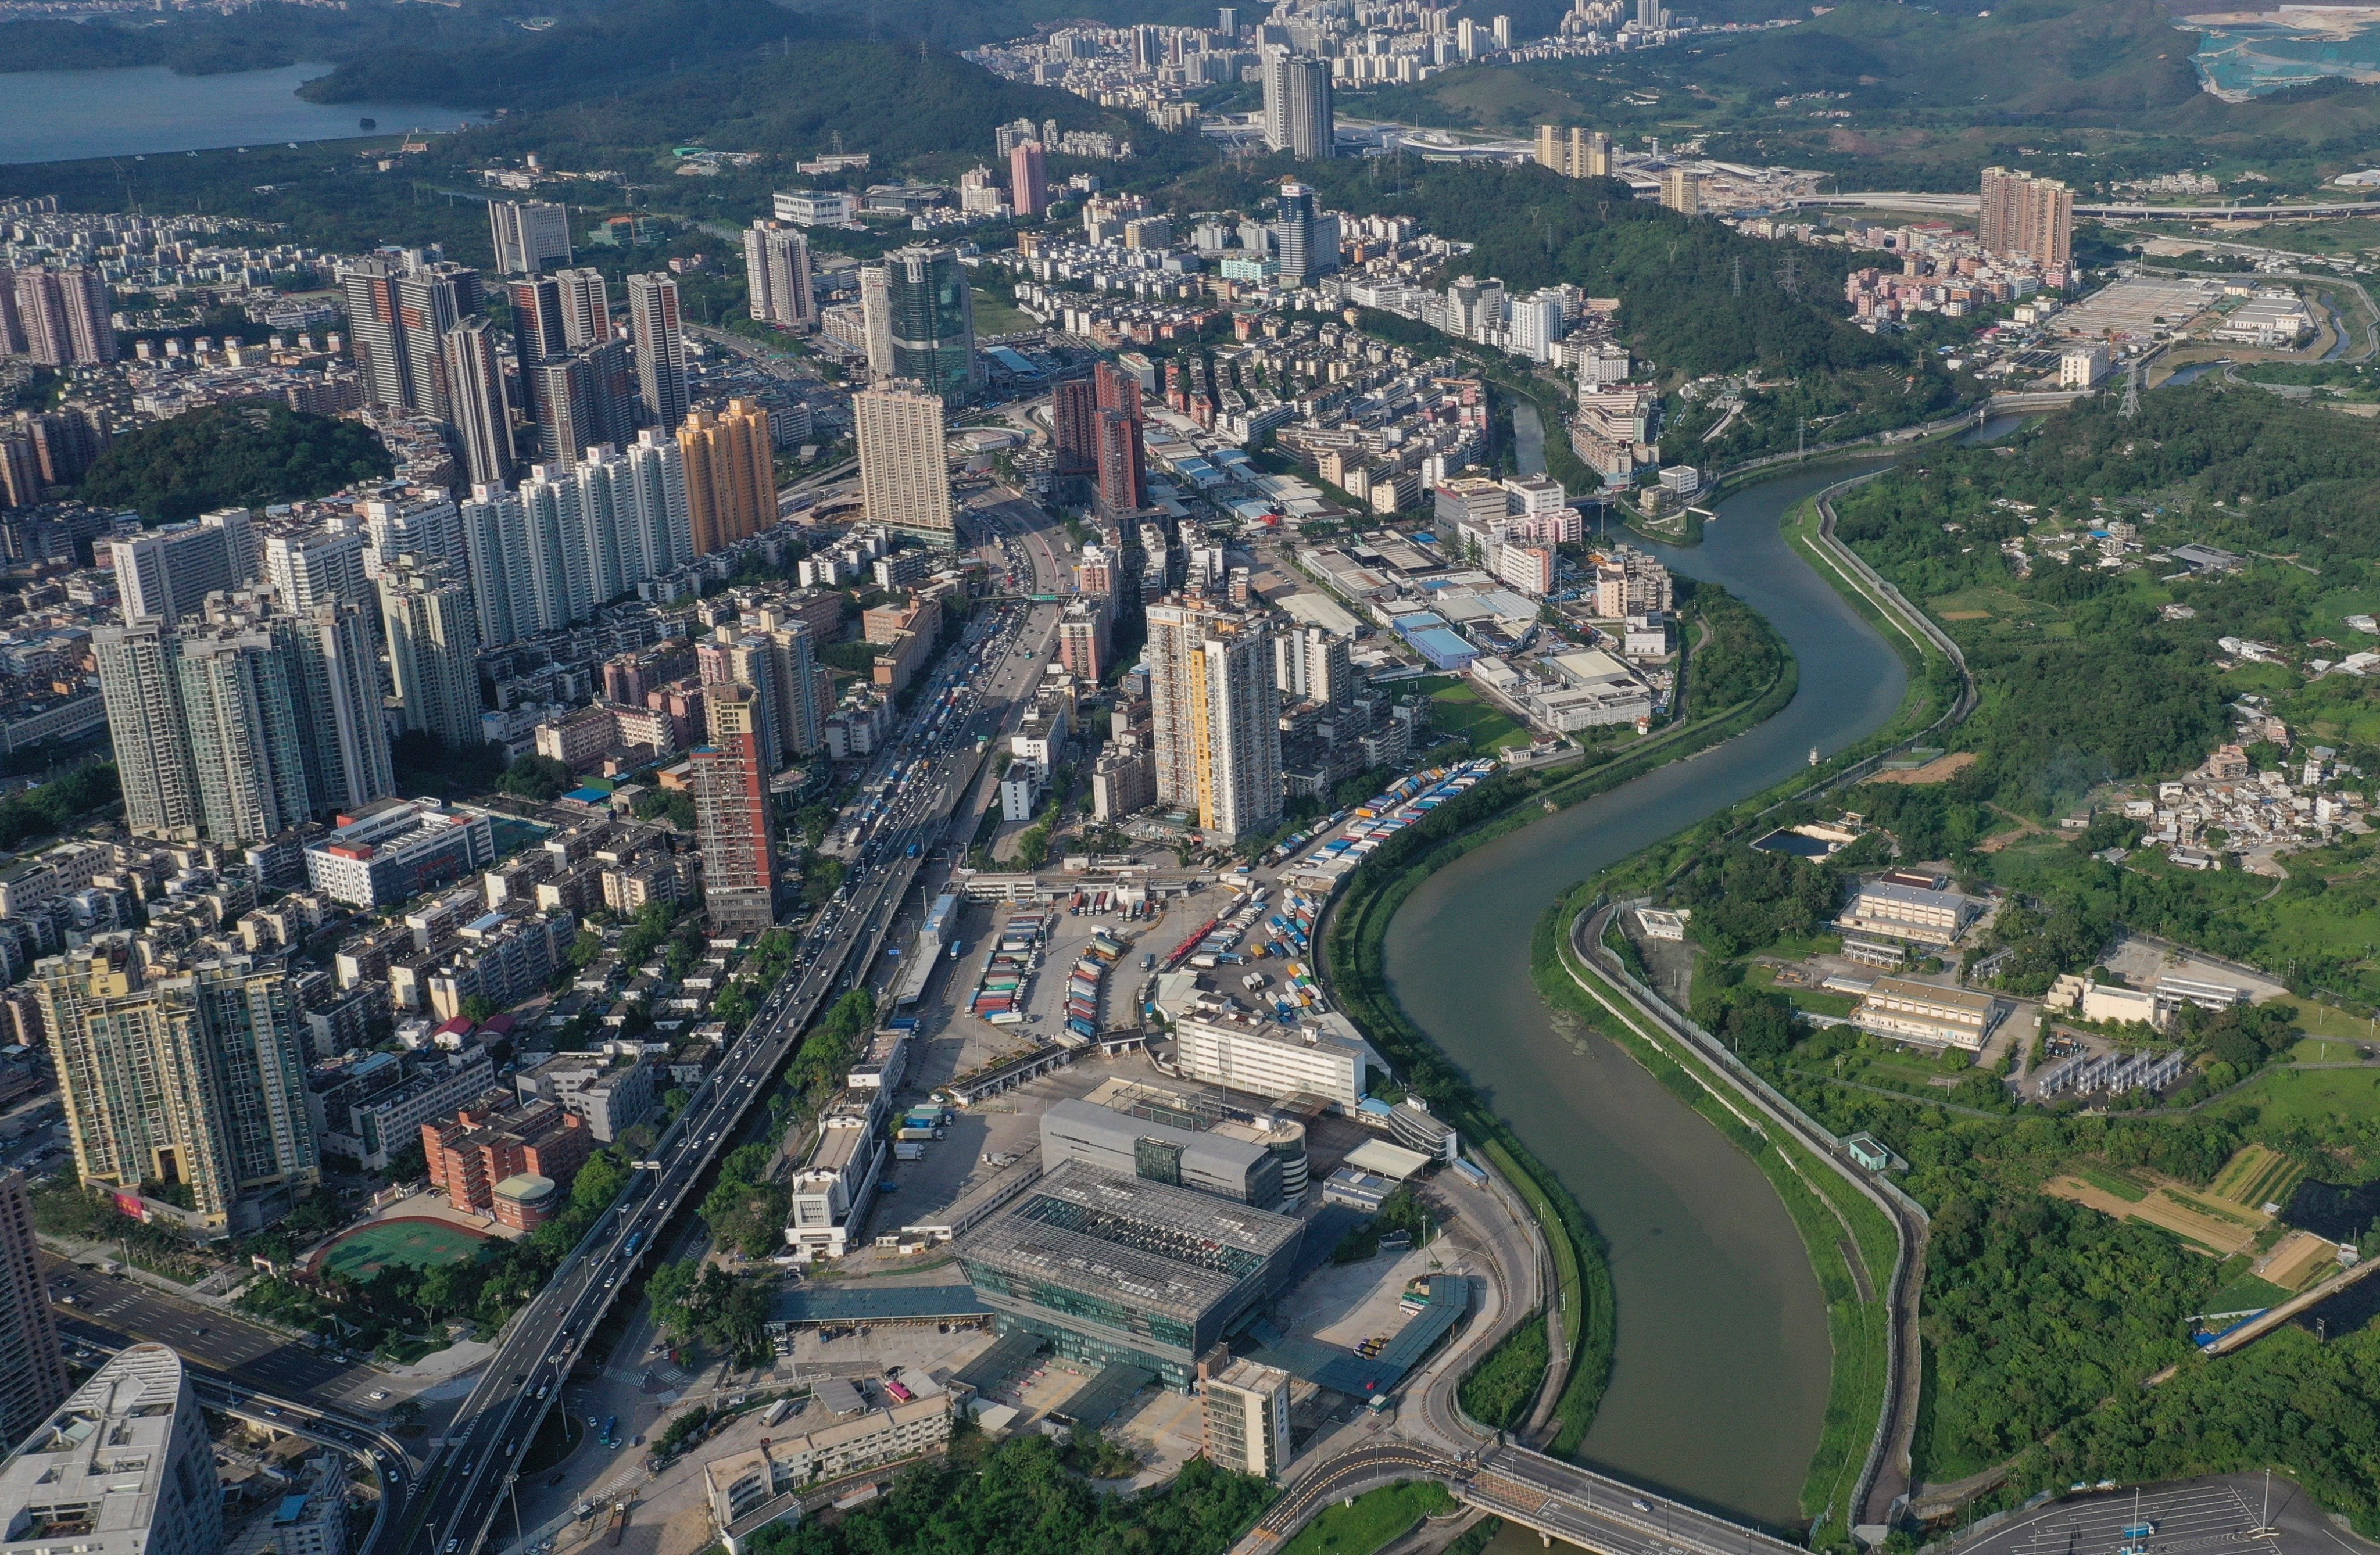 The hub includes cities in Guangdong as well as Hong Kong and Macau. Photo: Martin Chan